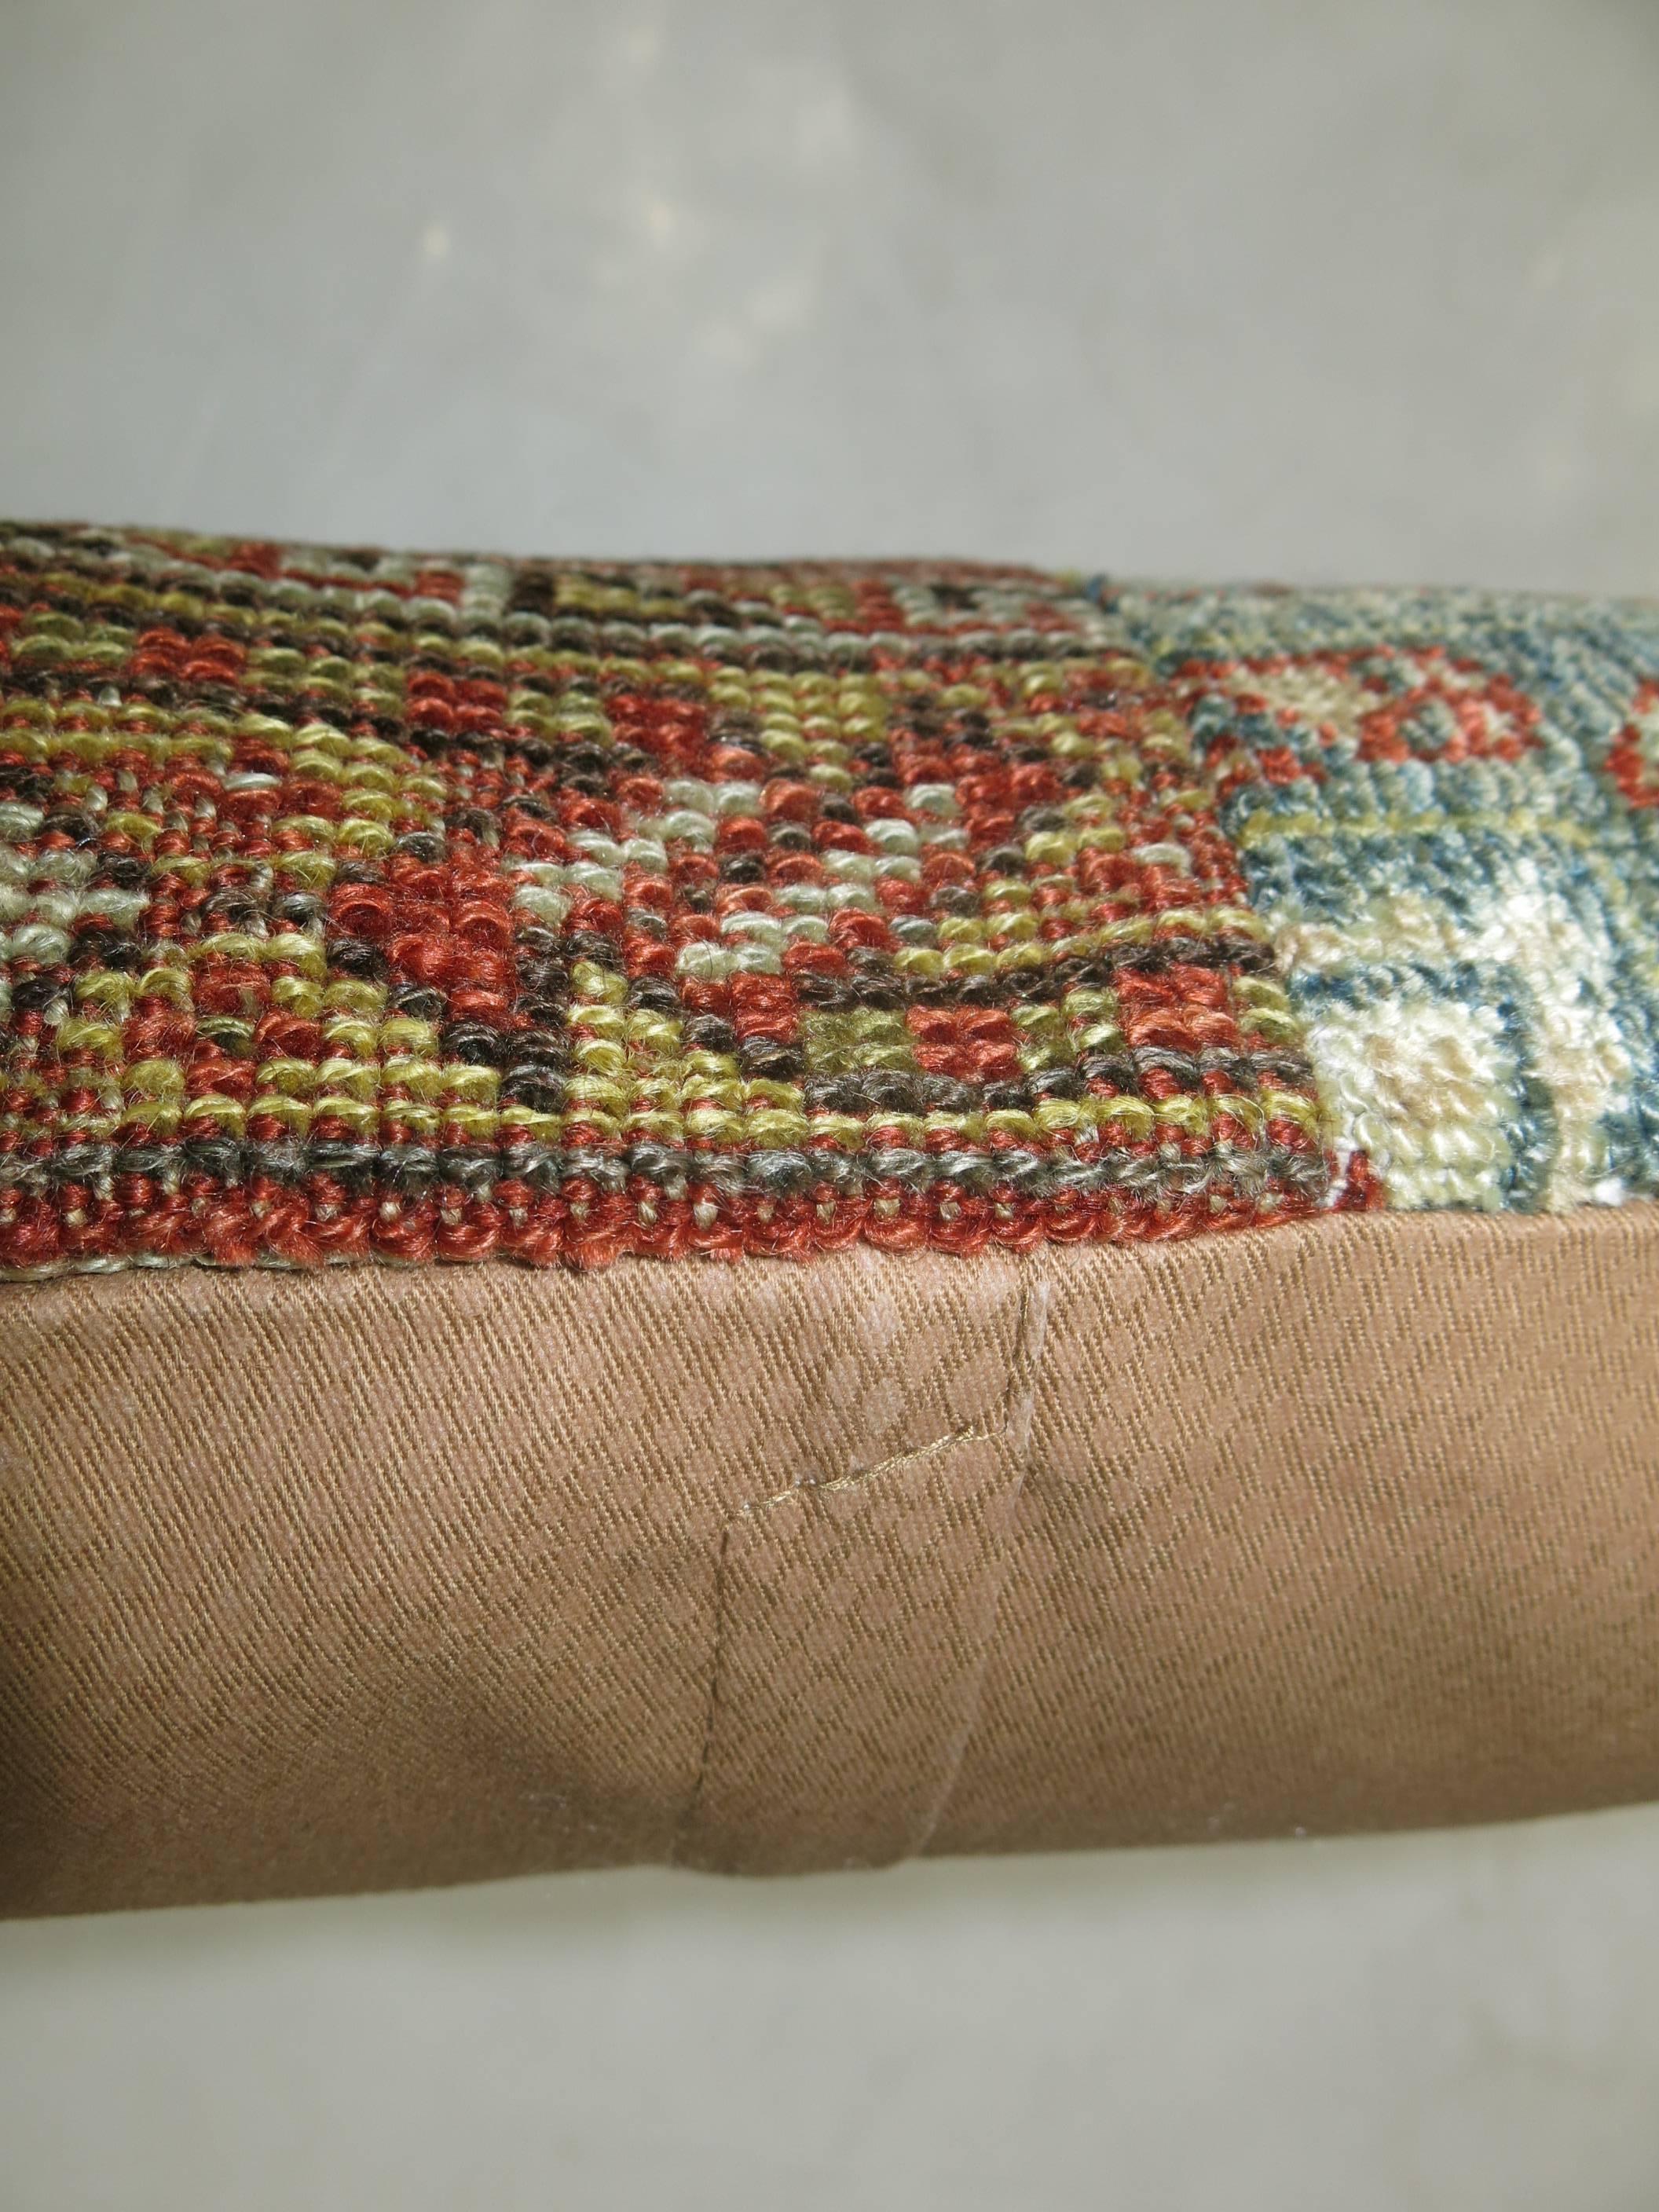 Pillow made from an assortment of vintage Persian rugs with cotton back. Zipper closure and foam insert provided. Measures: 17” x 17”.